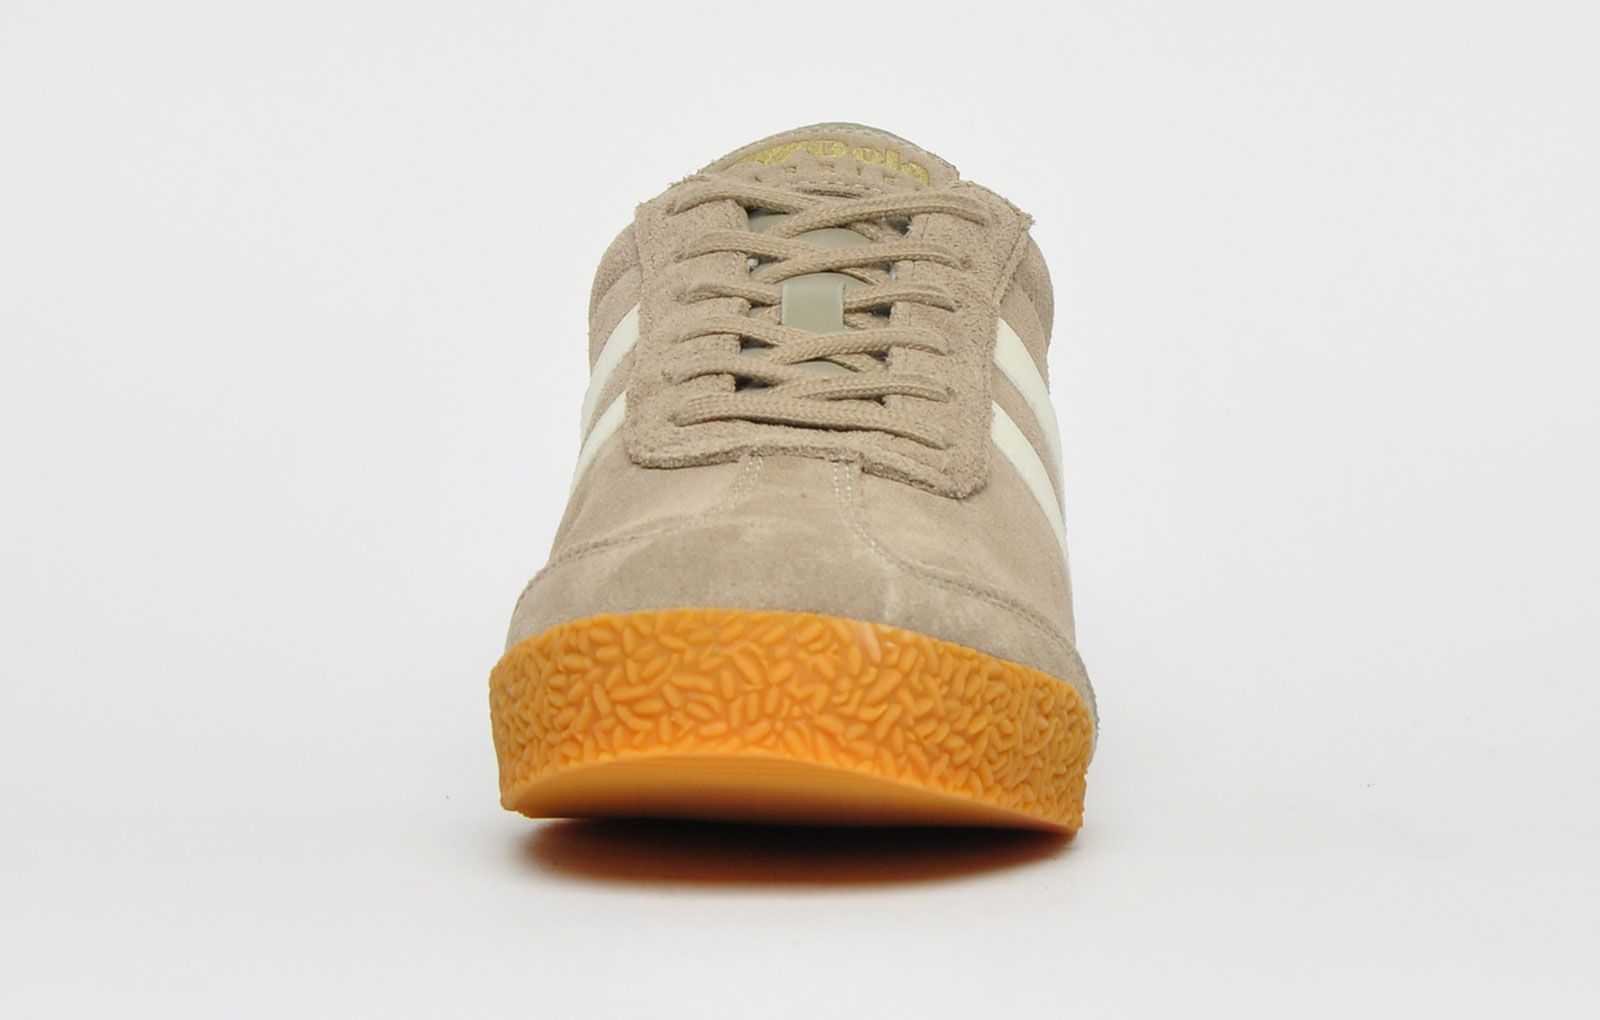 <p>These Gola Classics Harrier Suede men’s trainers are the perfect choice of footwear for casual days, delivering a timeless retro inspired design that oozes vintage charm that will enhance any casual outfit. Complete with a premium suede leather construction and intricate stitch detailing throughout to provide a five-star finish. </p> <p>- Gola Classics vintage silhouette</p> <p> - Secure lace up fastening delivers a snug fit </p> <p>- Premium suede leather upper delivers added flare</p> <p> - Intricate stitch detailing provides a five-star finish</p> <p> - Cushioned inner delivers a sumptuous wear </p> <p>- Durable outsole provides added traction</p> <p> - Gola Classics branding throughout</p>